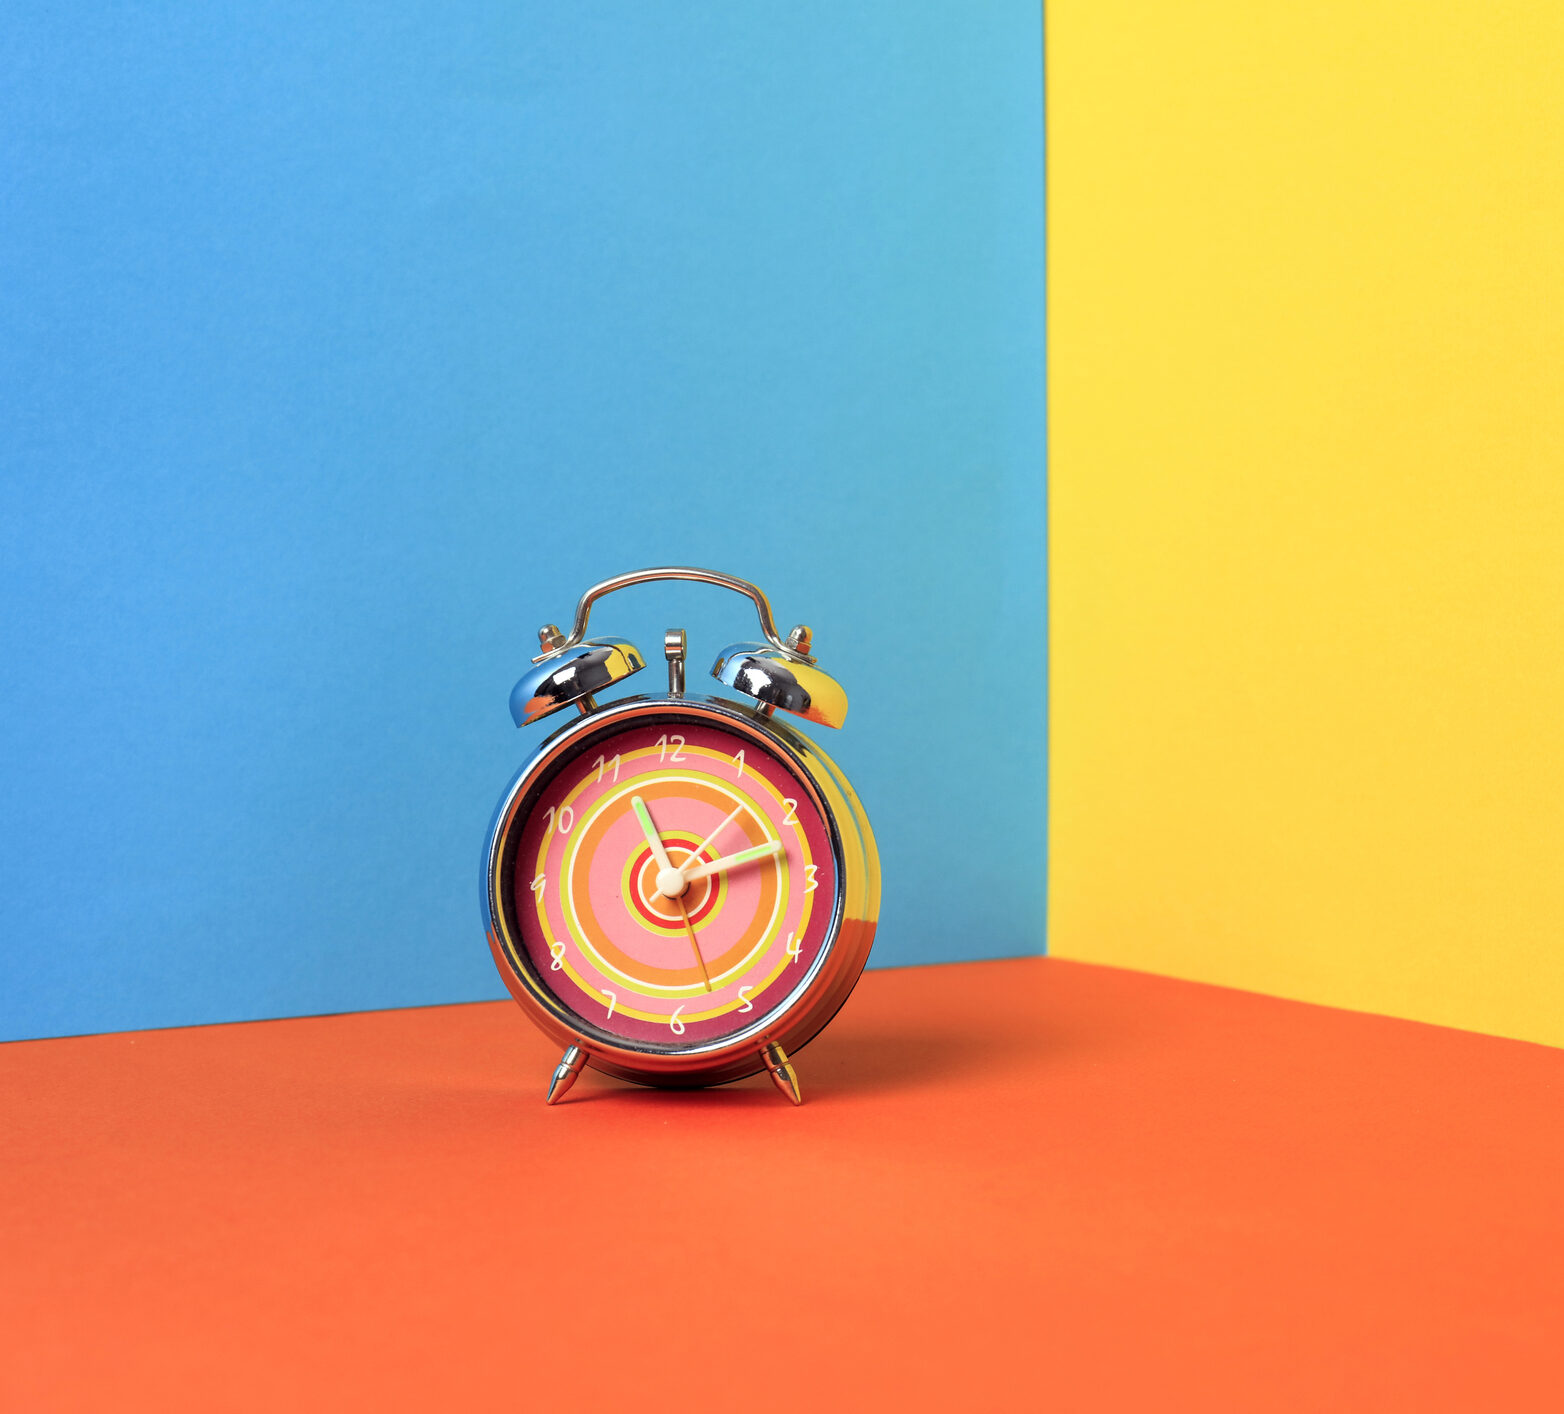 Alarm clock on a color background